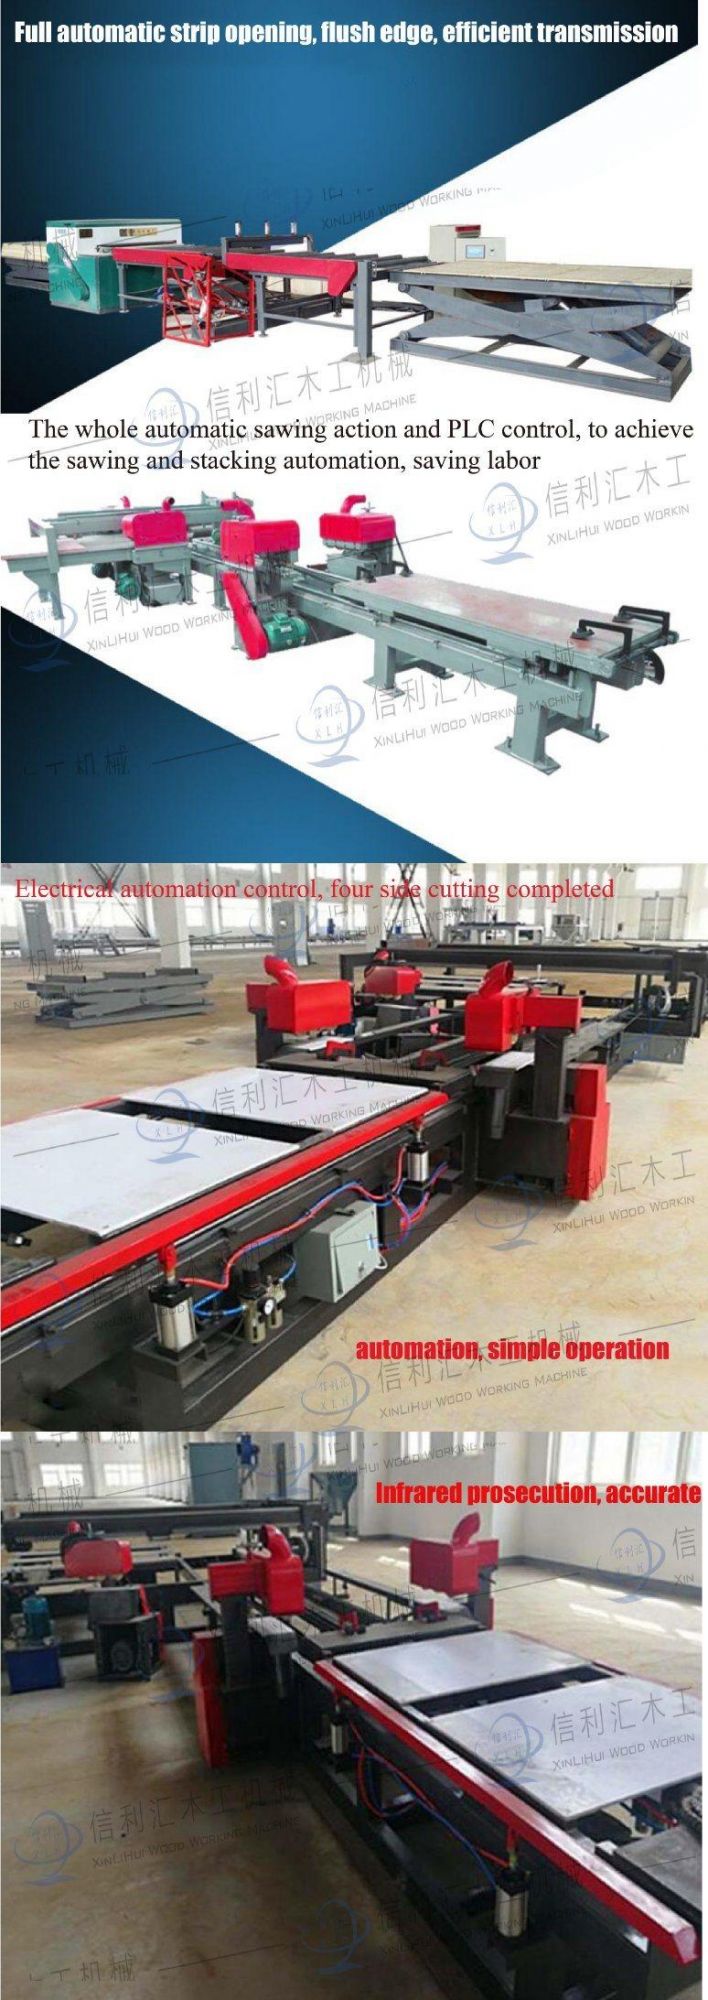 Shandong Direct Multi-Layer Board Vertical and Horizontal Cutting Machine Automatic Woodworking Four-Side Saw Insulation Board Four-Side Saw